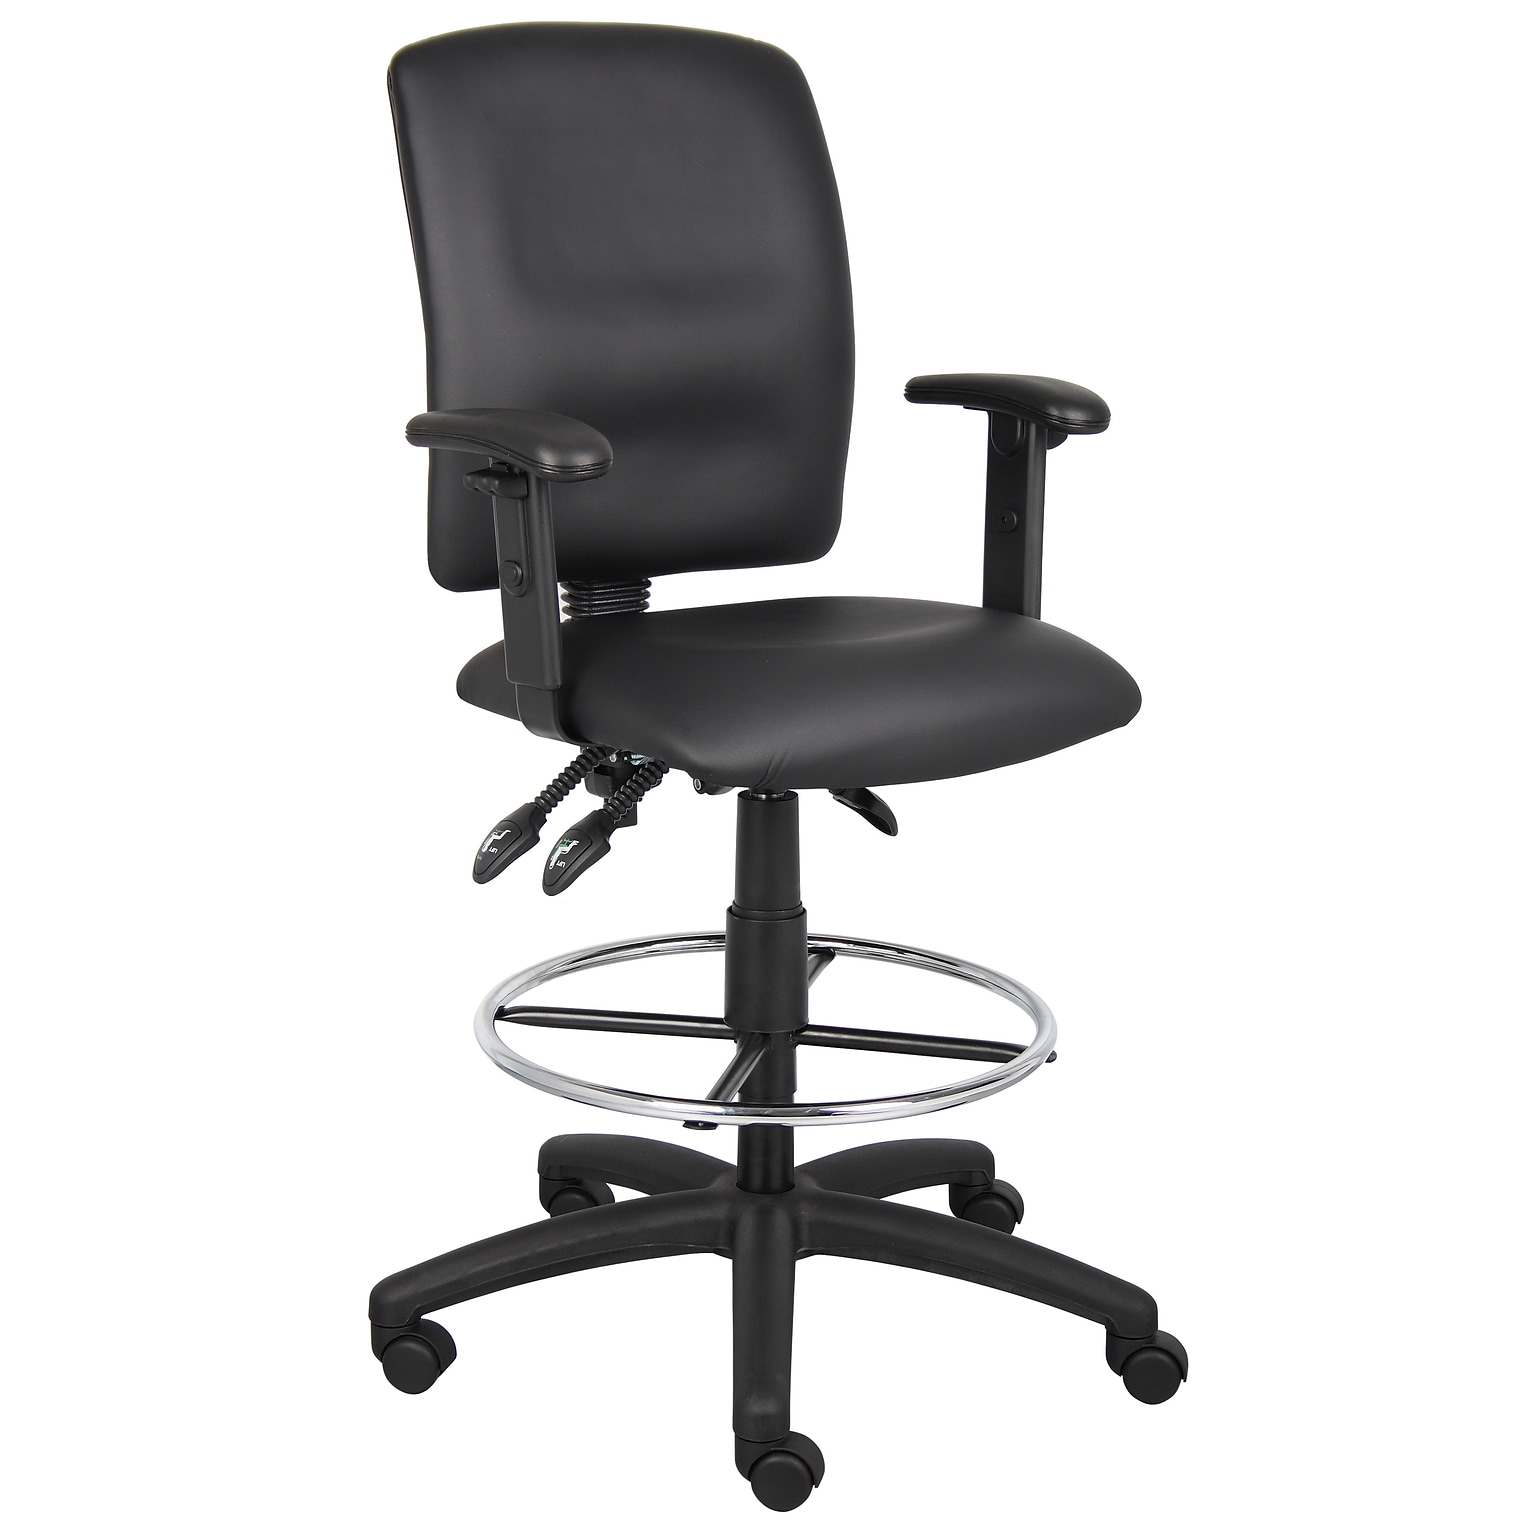 Boss® Multi-Function LeatherPlus Drafting Stool with Adjustable Arms